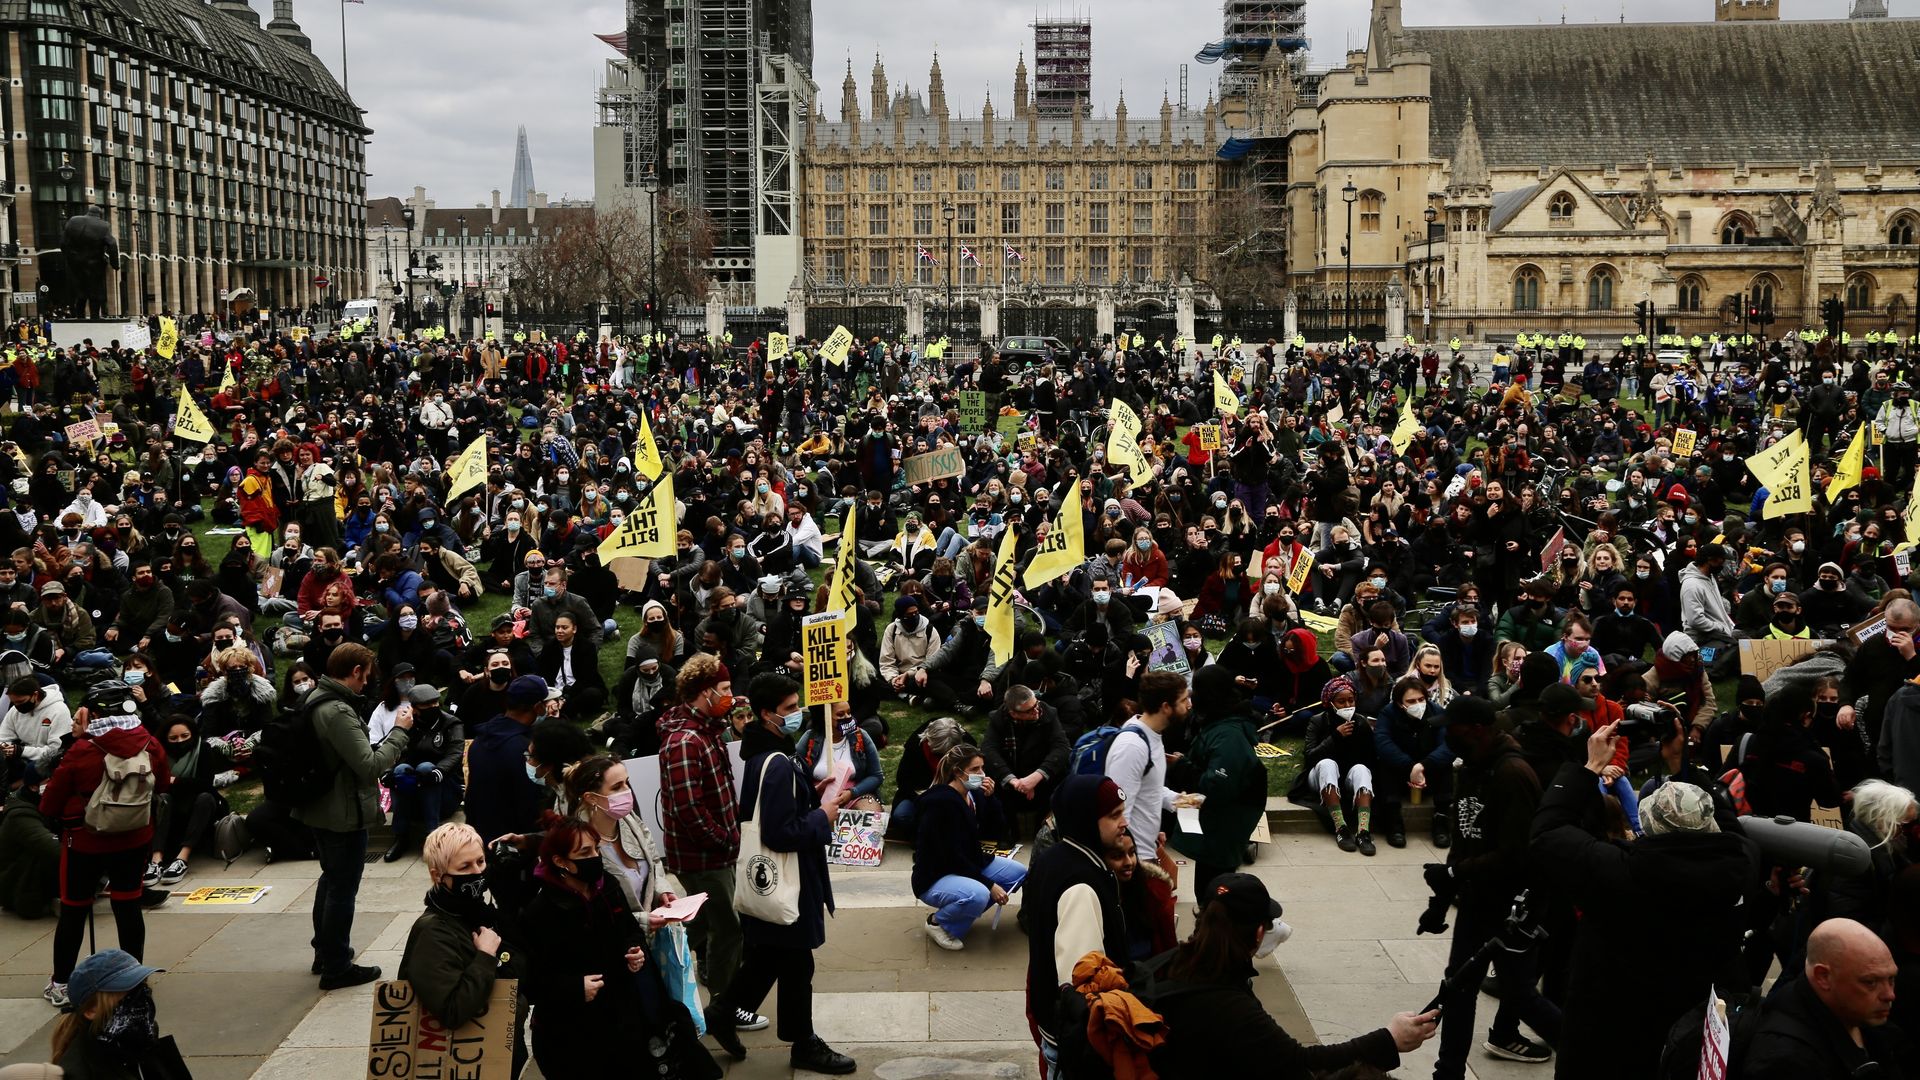 People marching toward Parliament Square in London as part of a "kill the bill" rally on April 3.